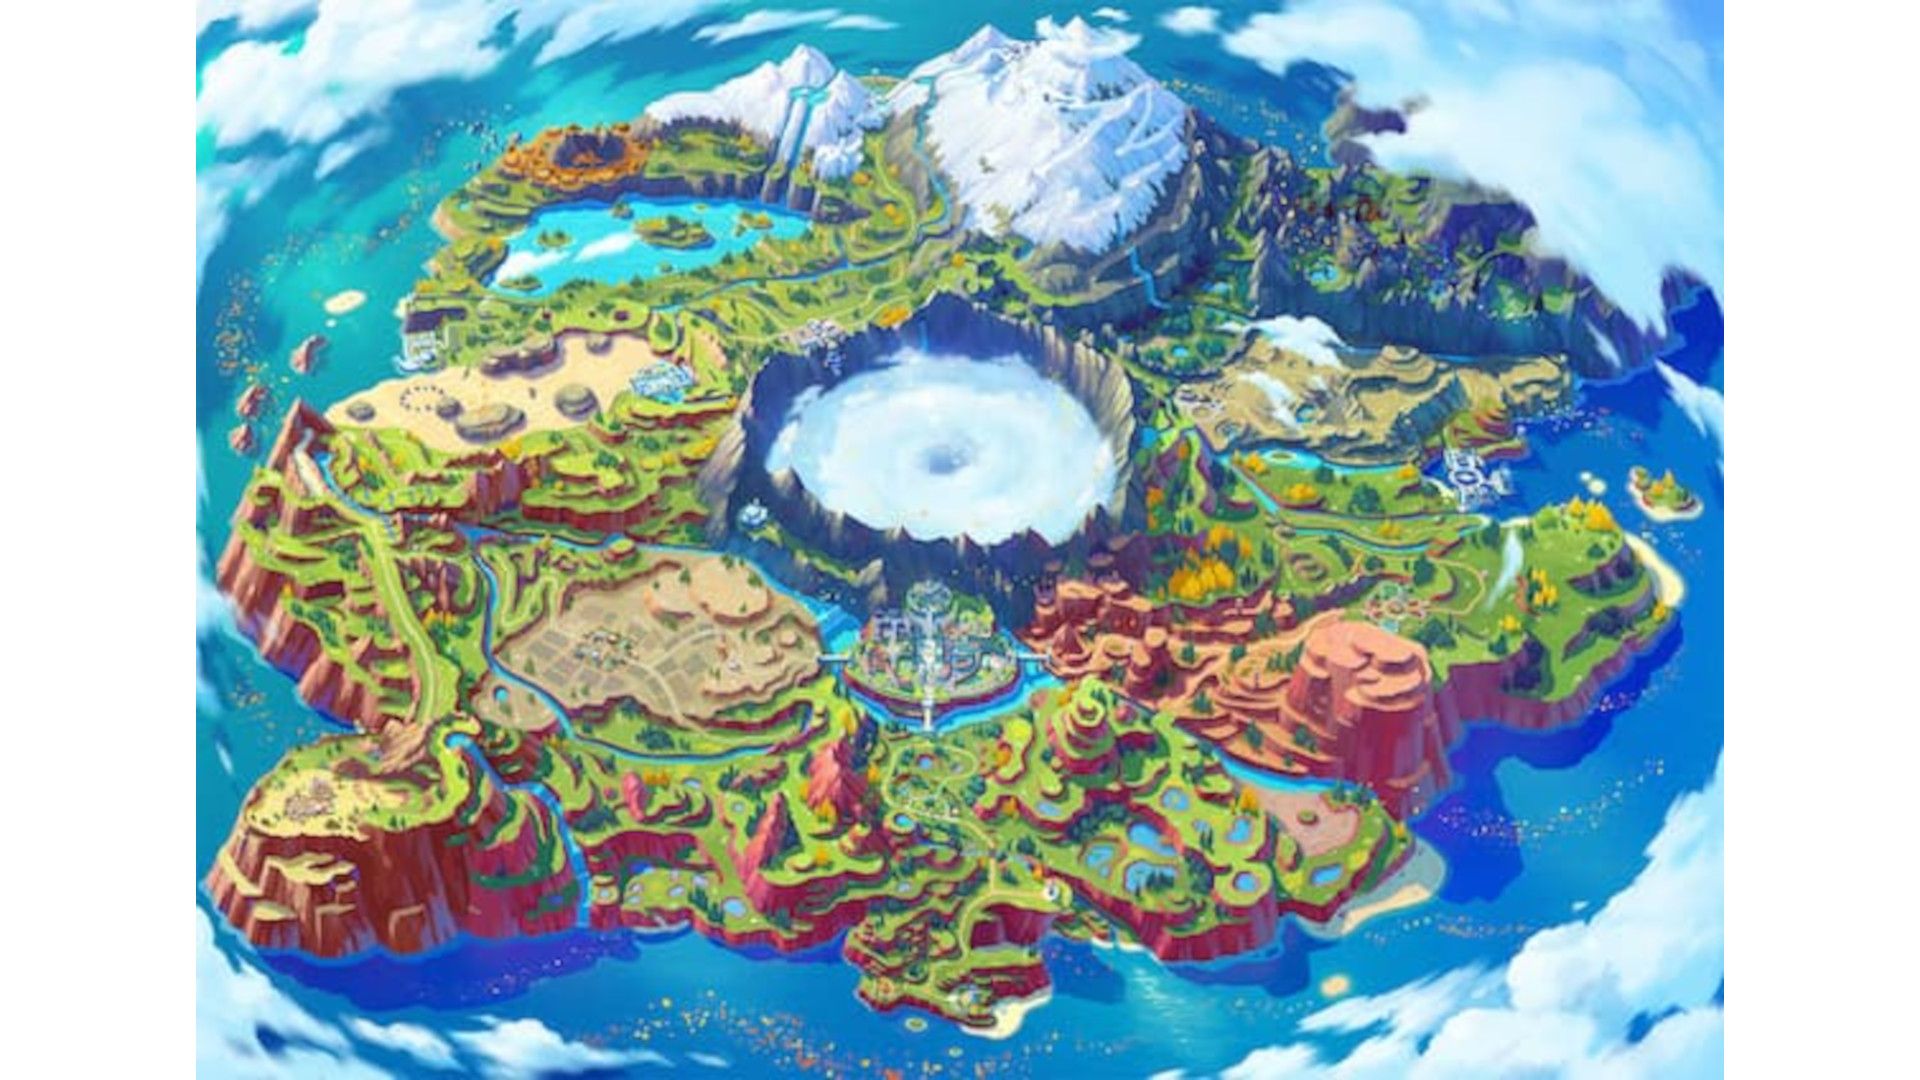 A map of the Paldea region in 'Pokémon Scarlet and Violet' is shown.